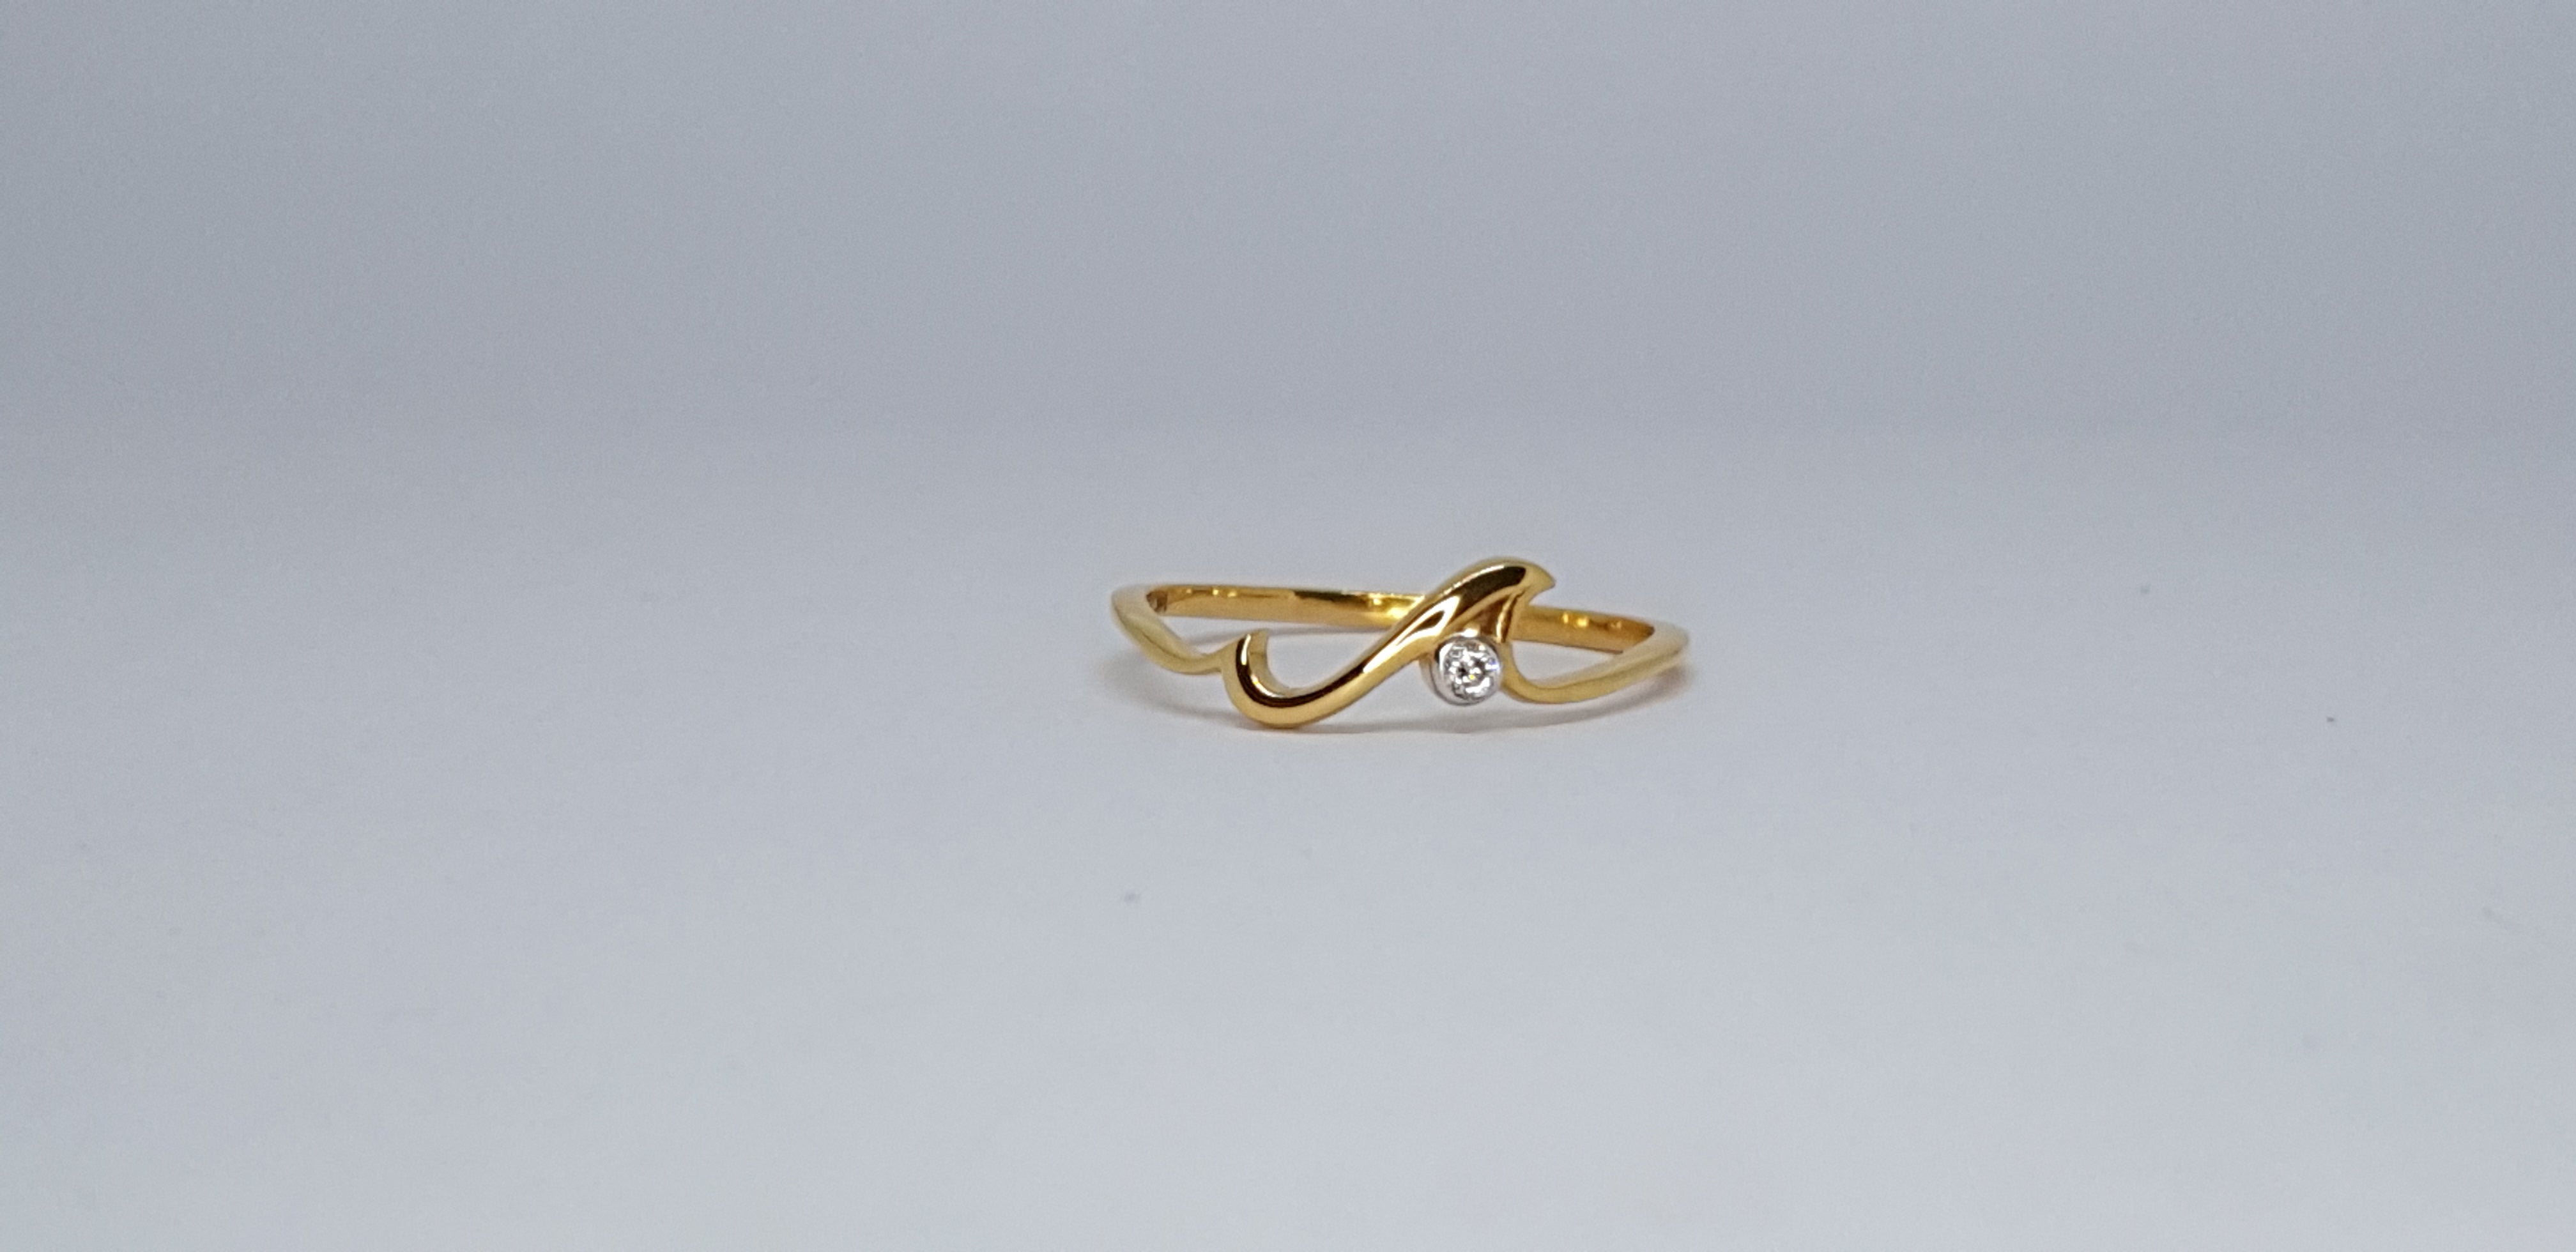 Natural Diamond Wave Ring 14K Solid Gold Dainty Ocean Lover Jewelry Gift.